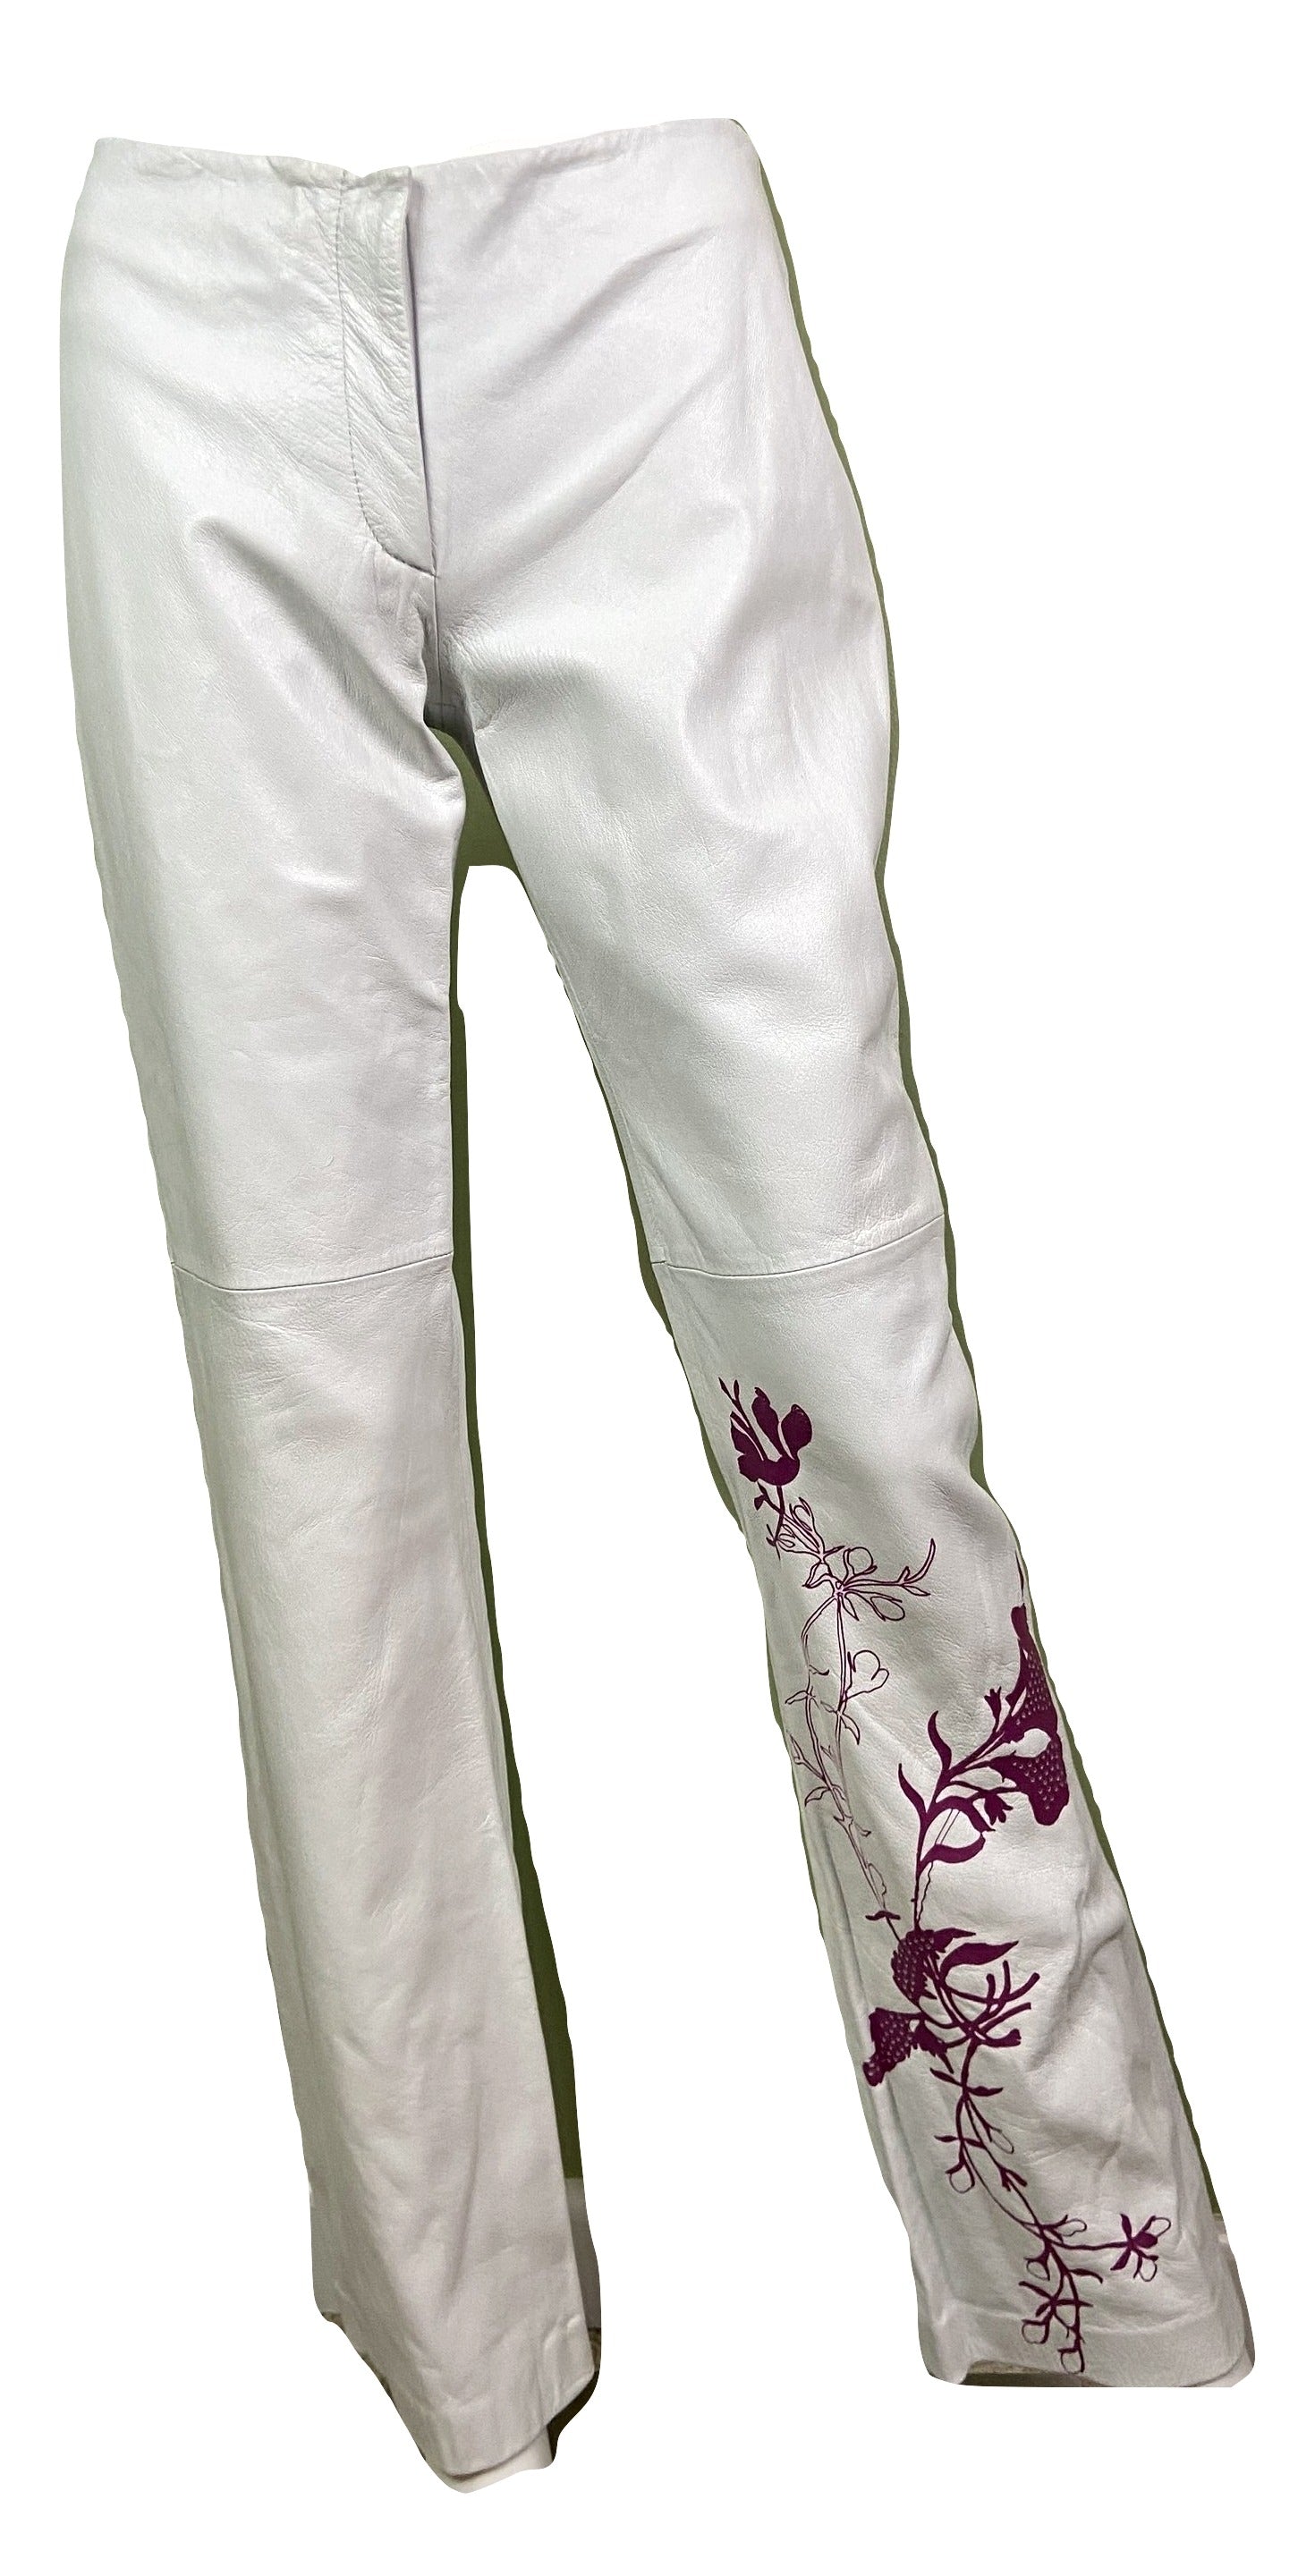 Vintage White Lambskin Leather Pink Graphic Print Pants Abby Essie